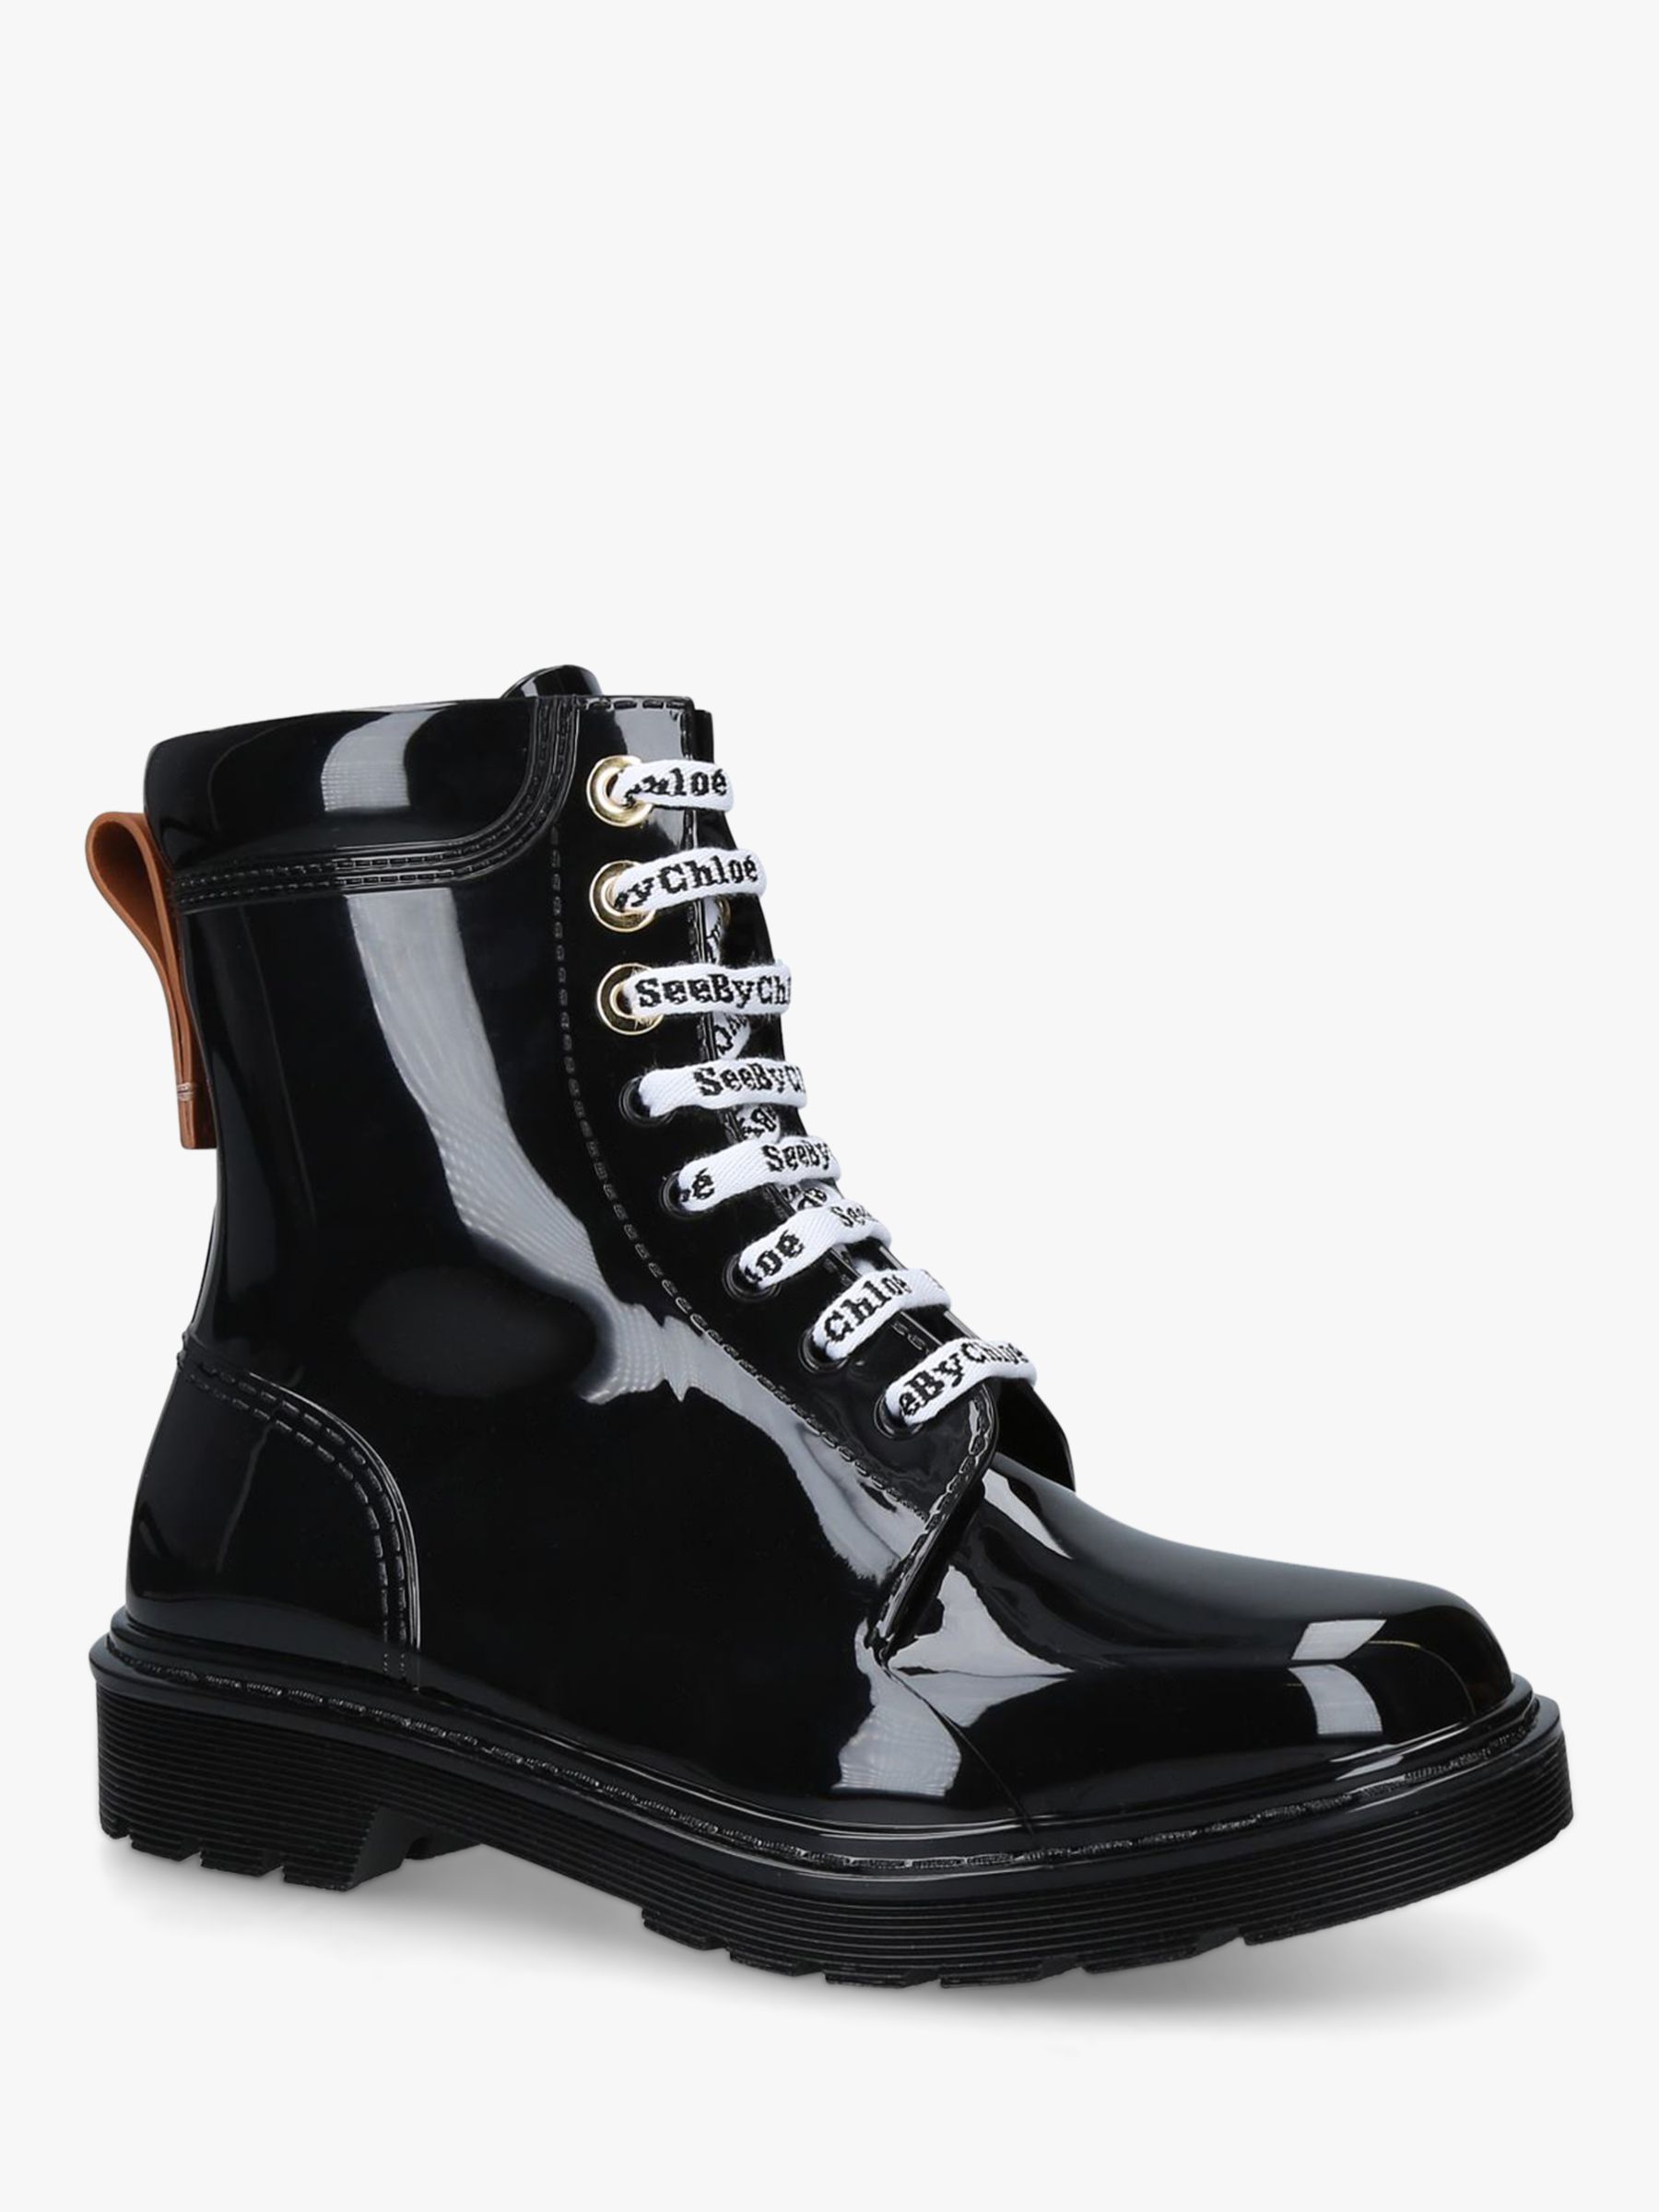 See By Chloé PVC Combat Boots, Black at John Lewis & Partners